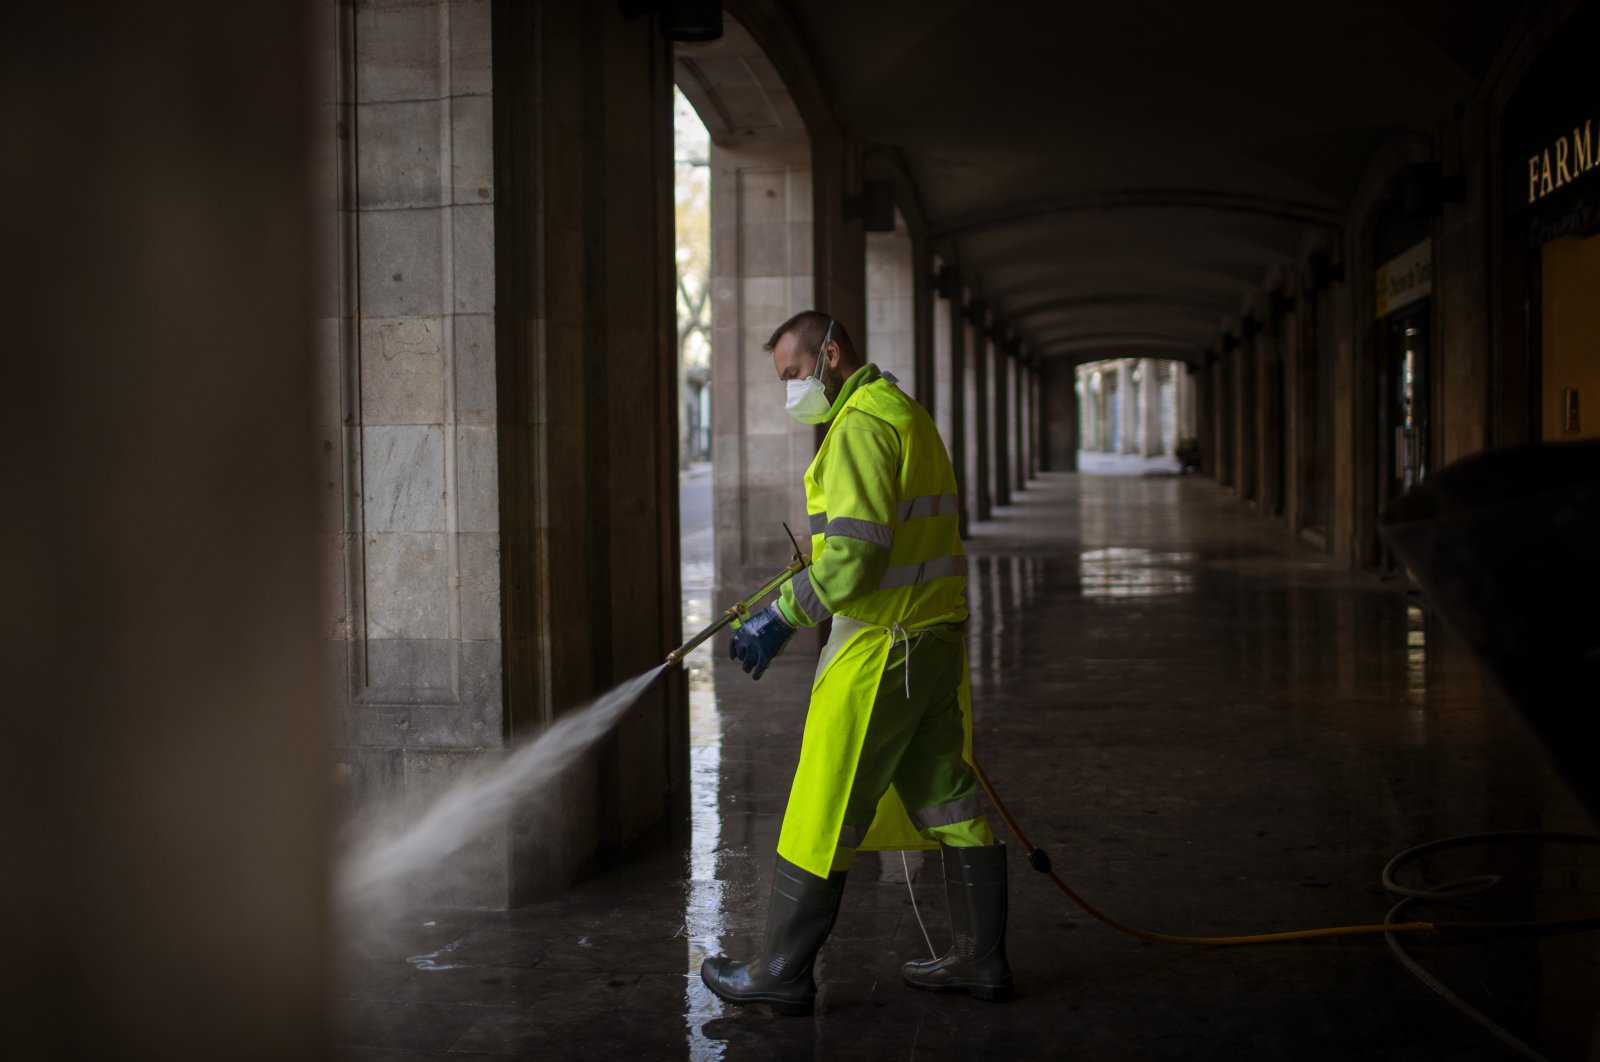 A worker disinfects the street to prevent the spread of the coronavirus in Barcelona, Spain, Thursday, March 19, 2020. (AP Photo)